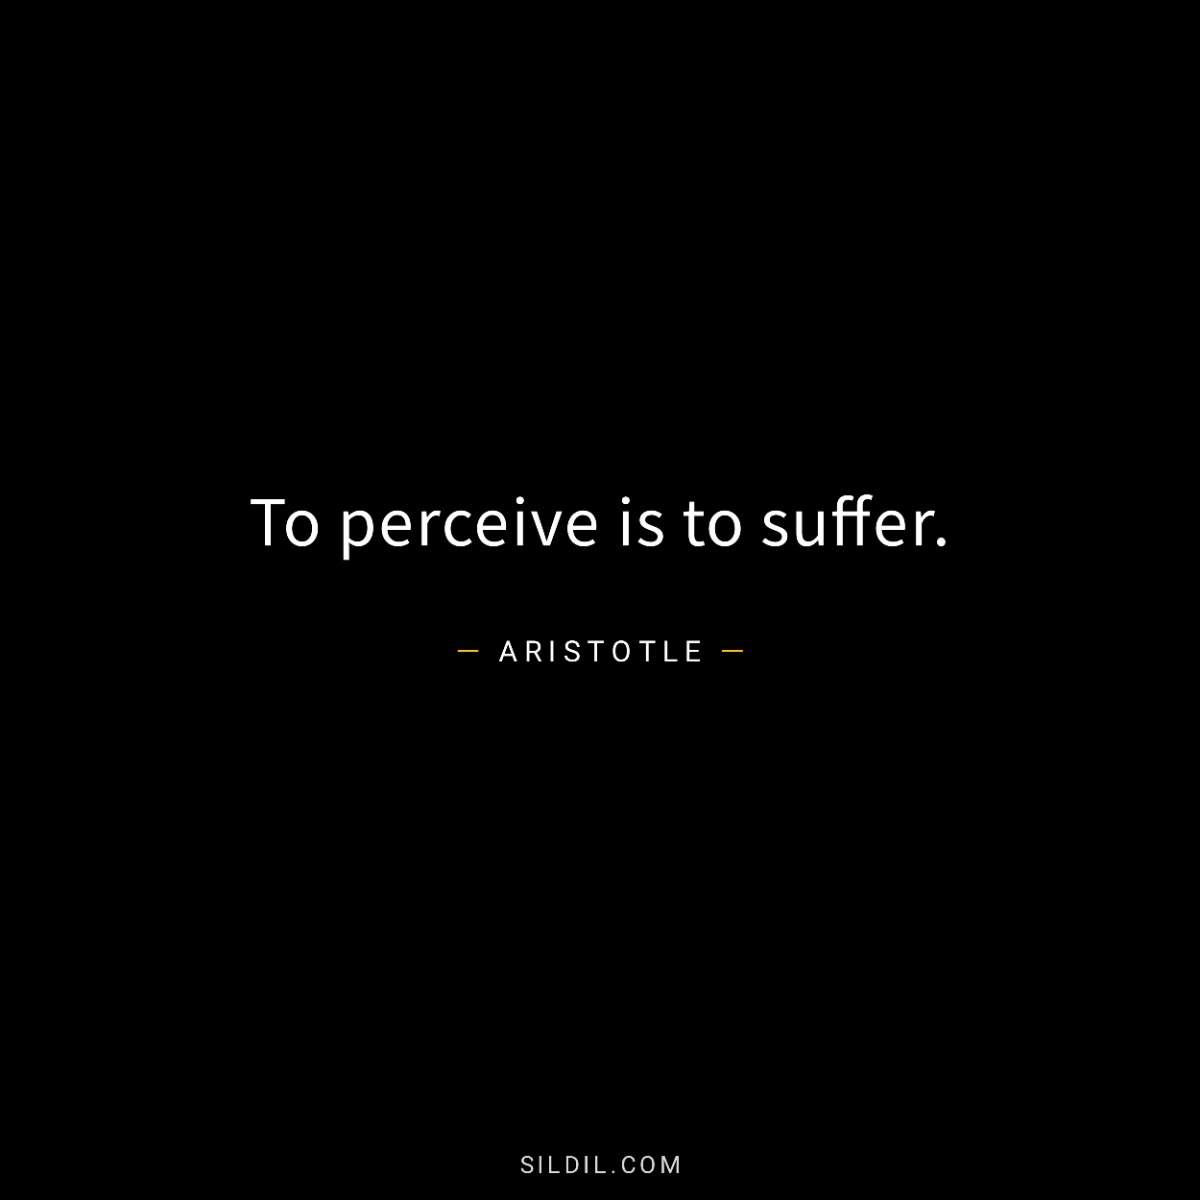 To perceive is to suffer.